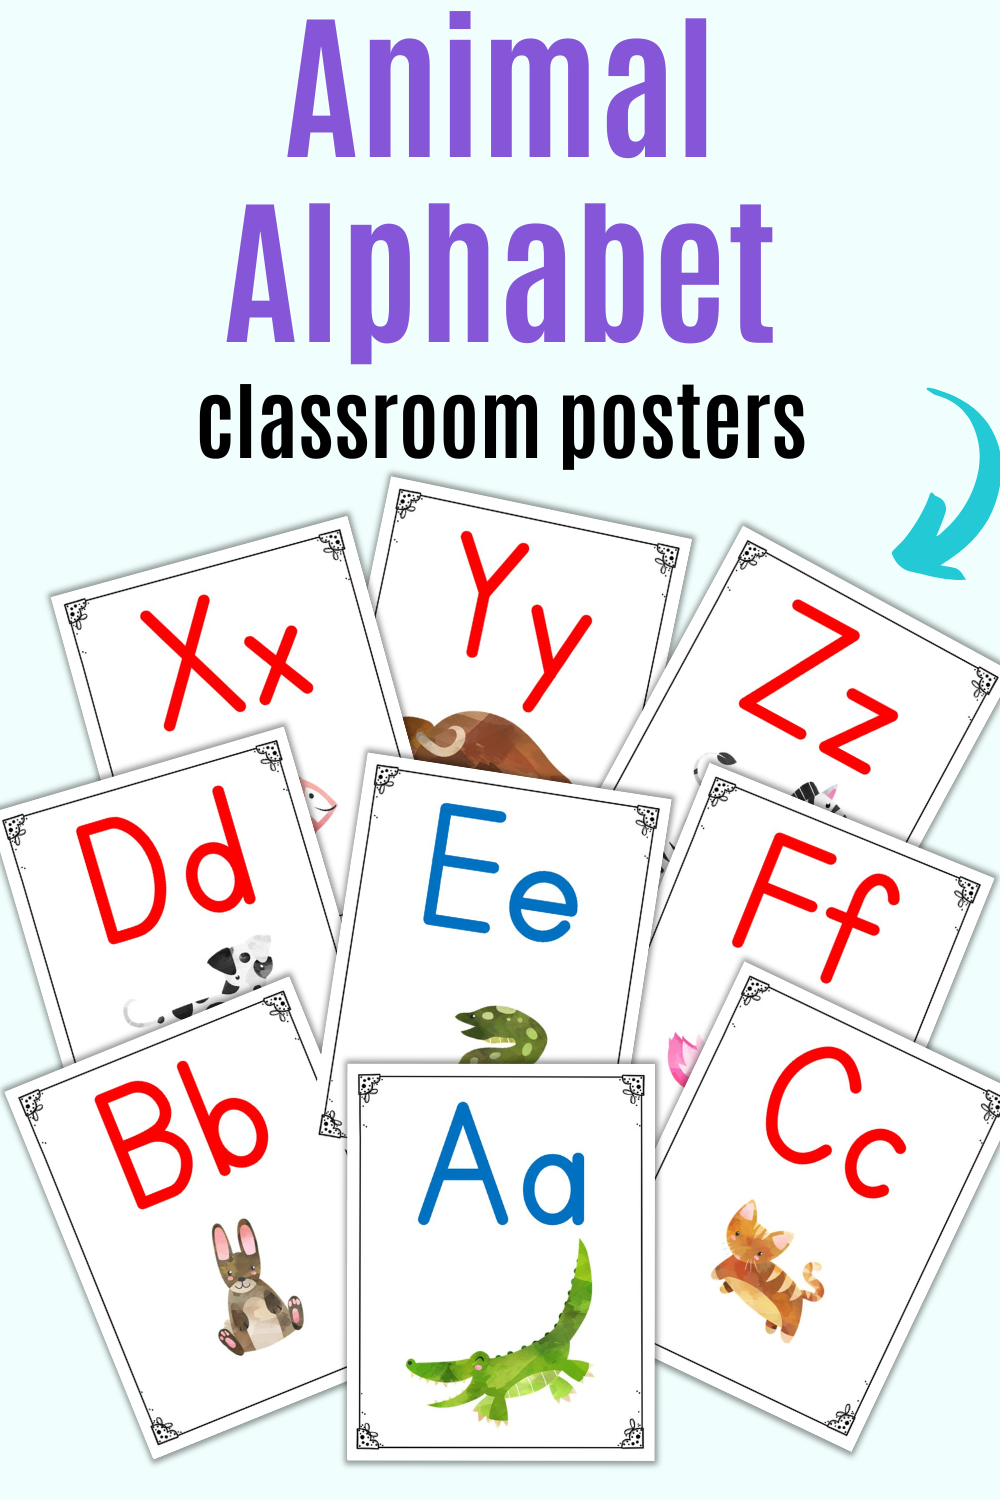 Text "animal alphabet classroom posters" with a preview of 9 alphabet posters with vowels in blue and consonants in red